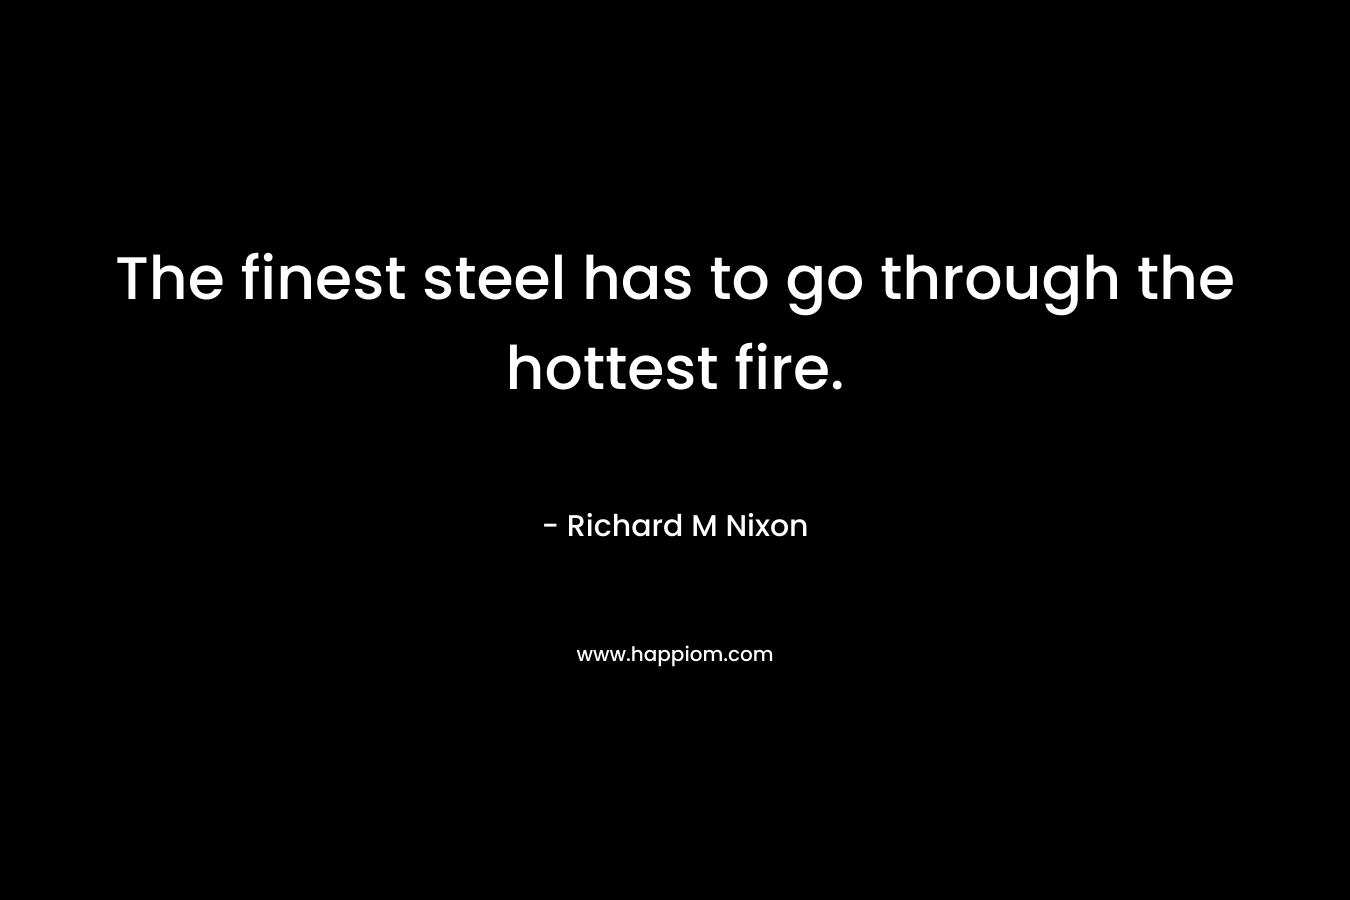 The finest steel has to go through the hottest fire.